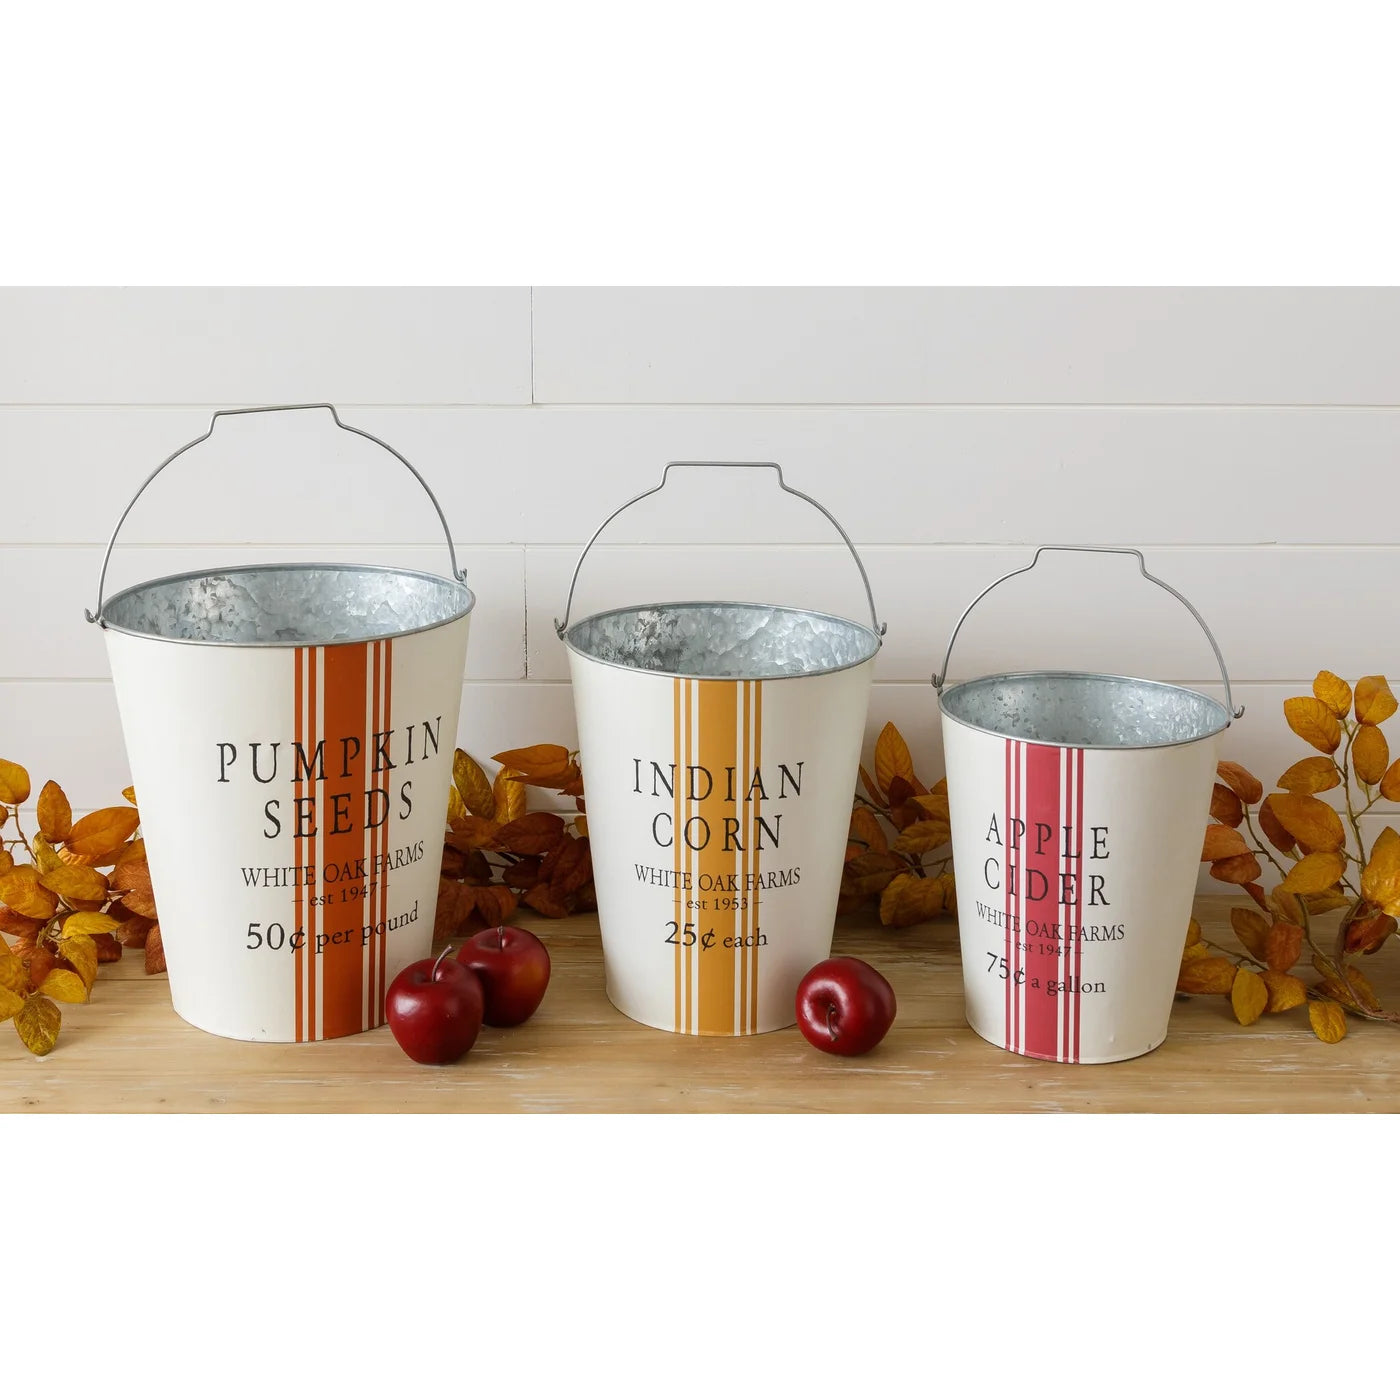 Apple Cider Bucket - Small - Five and Divine